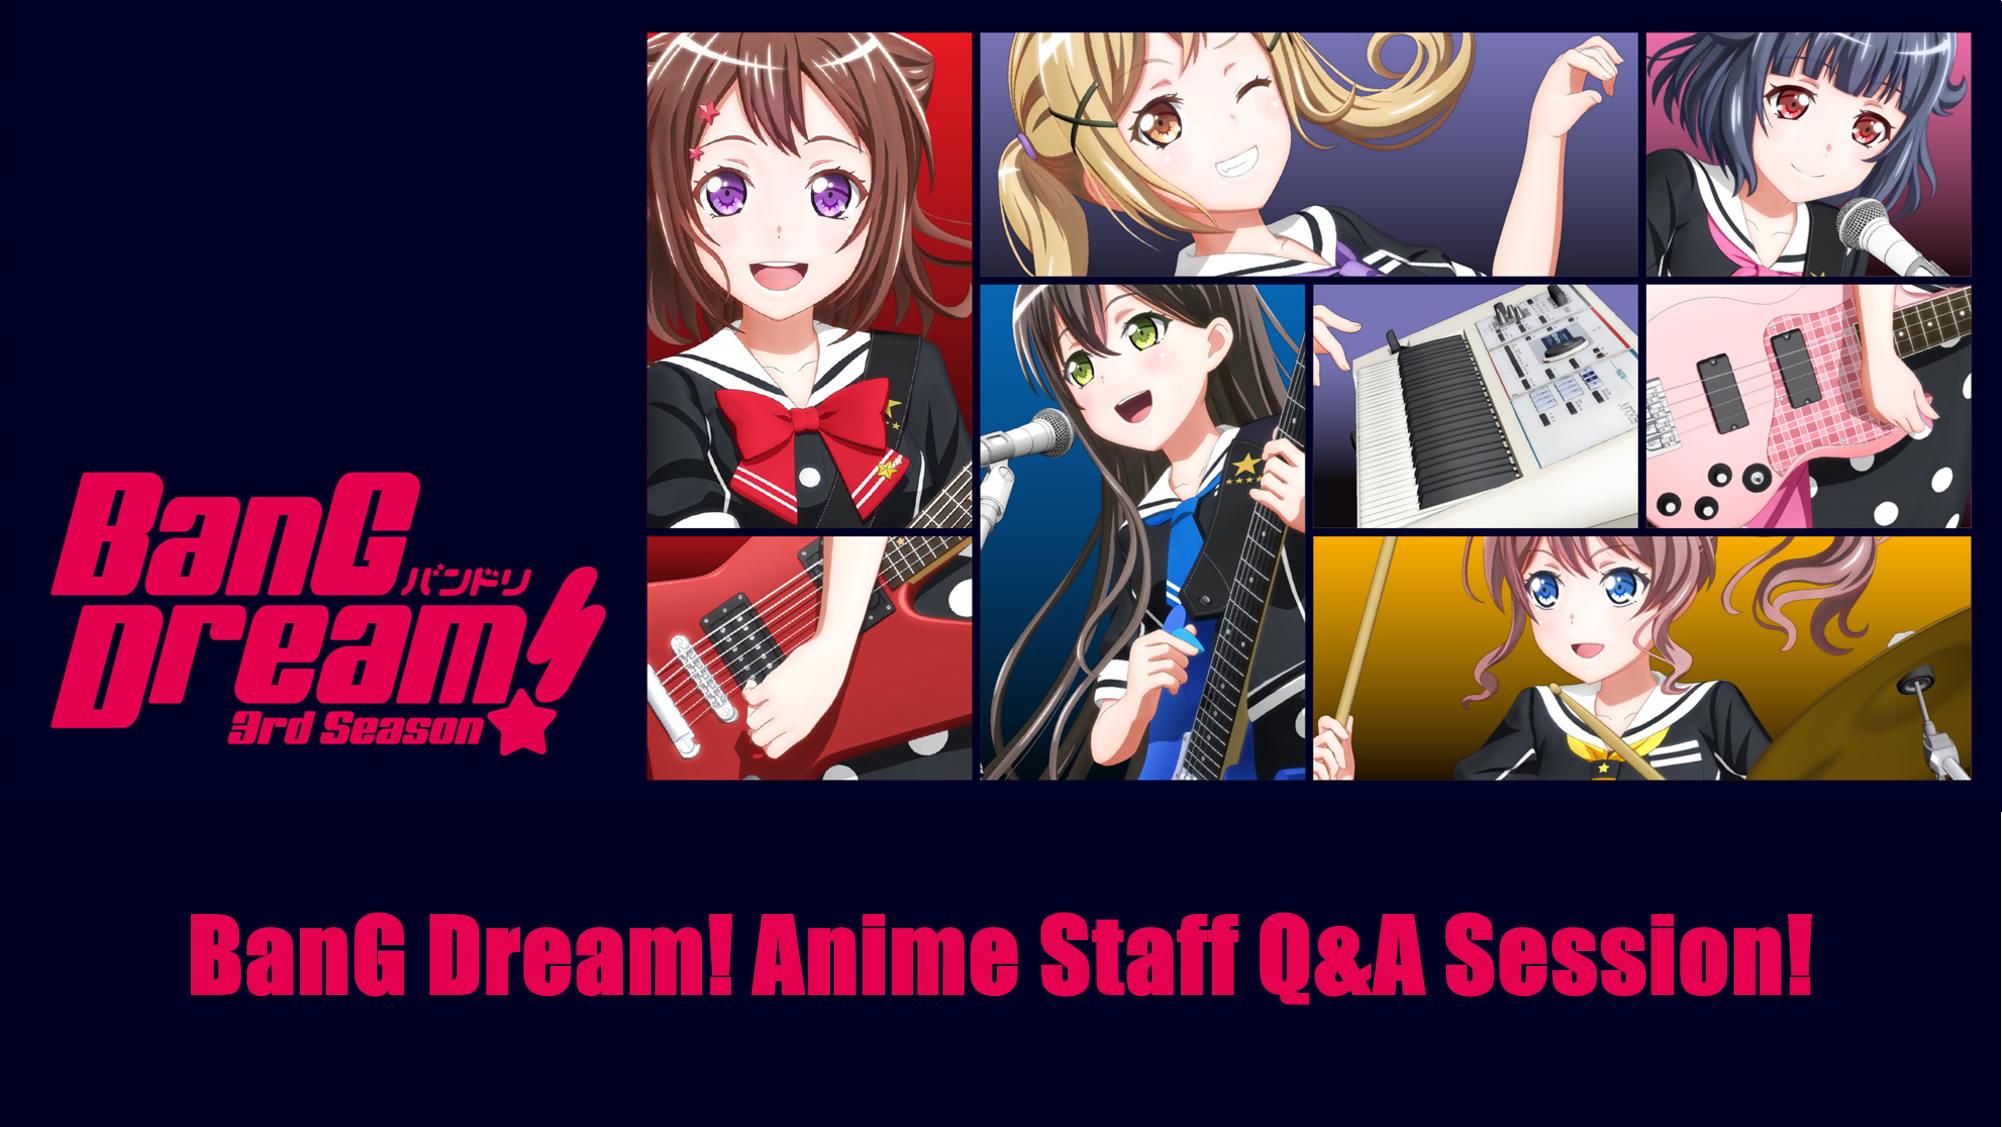 BanG Dream Girls Band Party - What will the 7 bands aim for on the